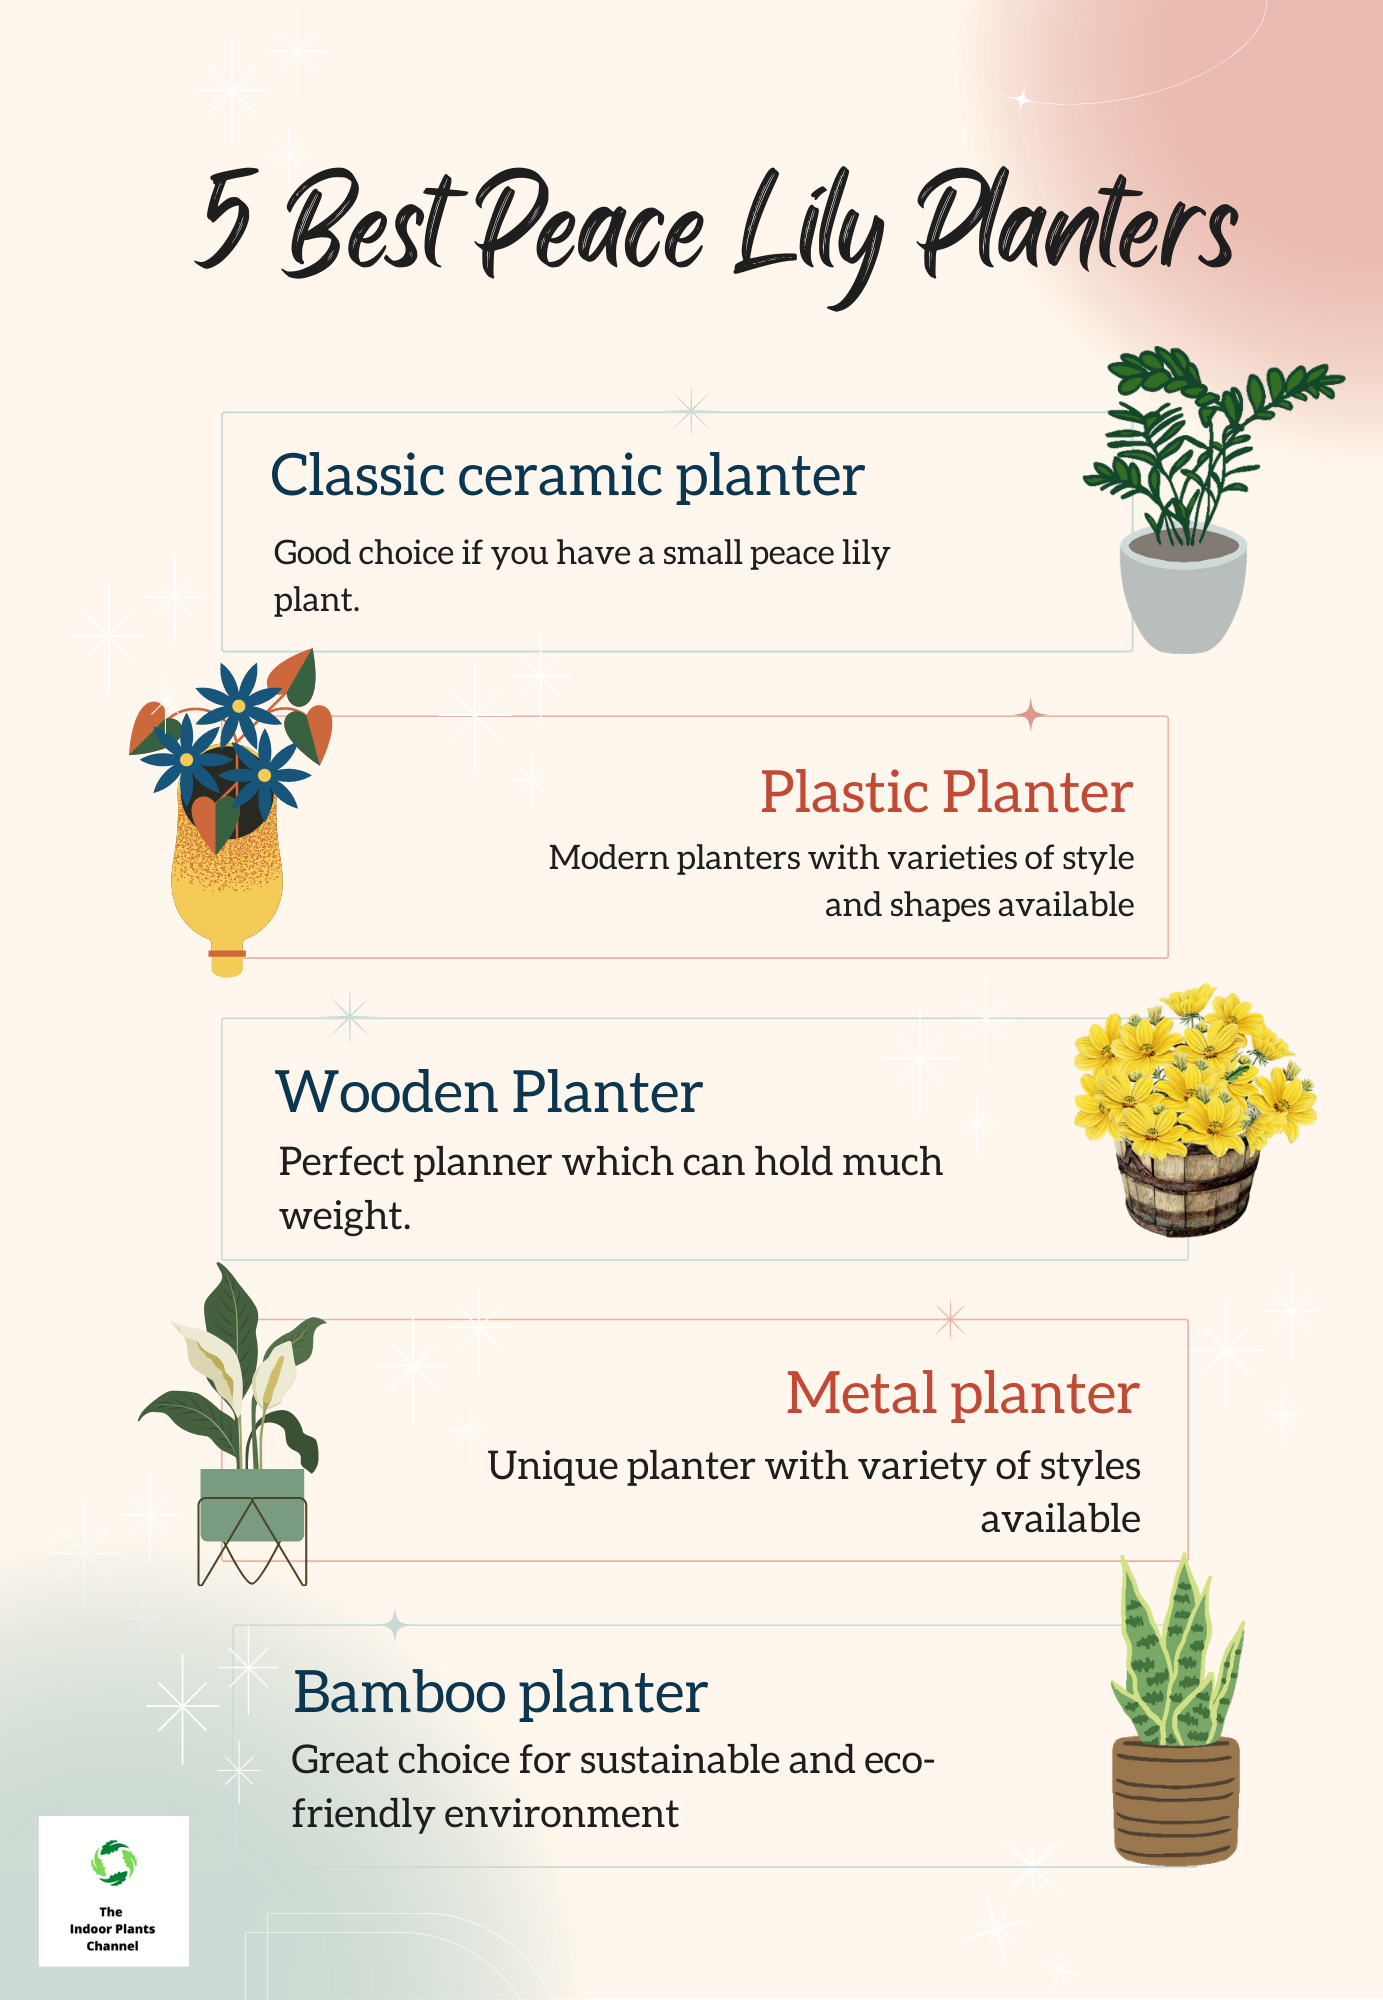 5 Best Peace Lily Planters